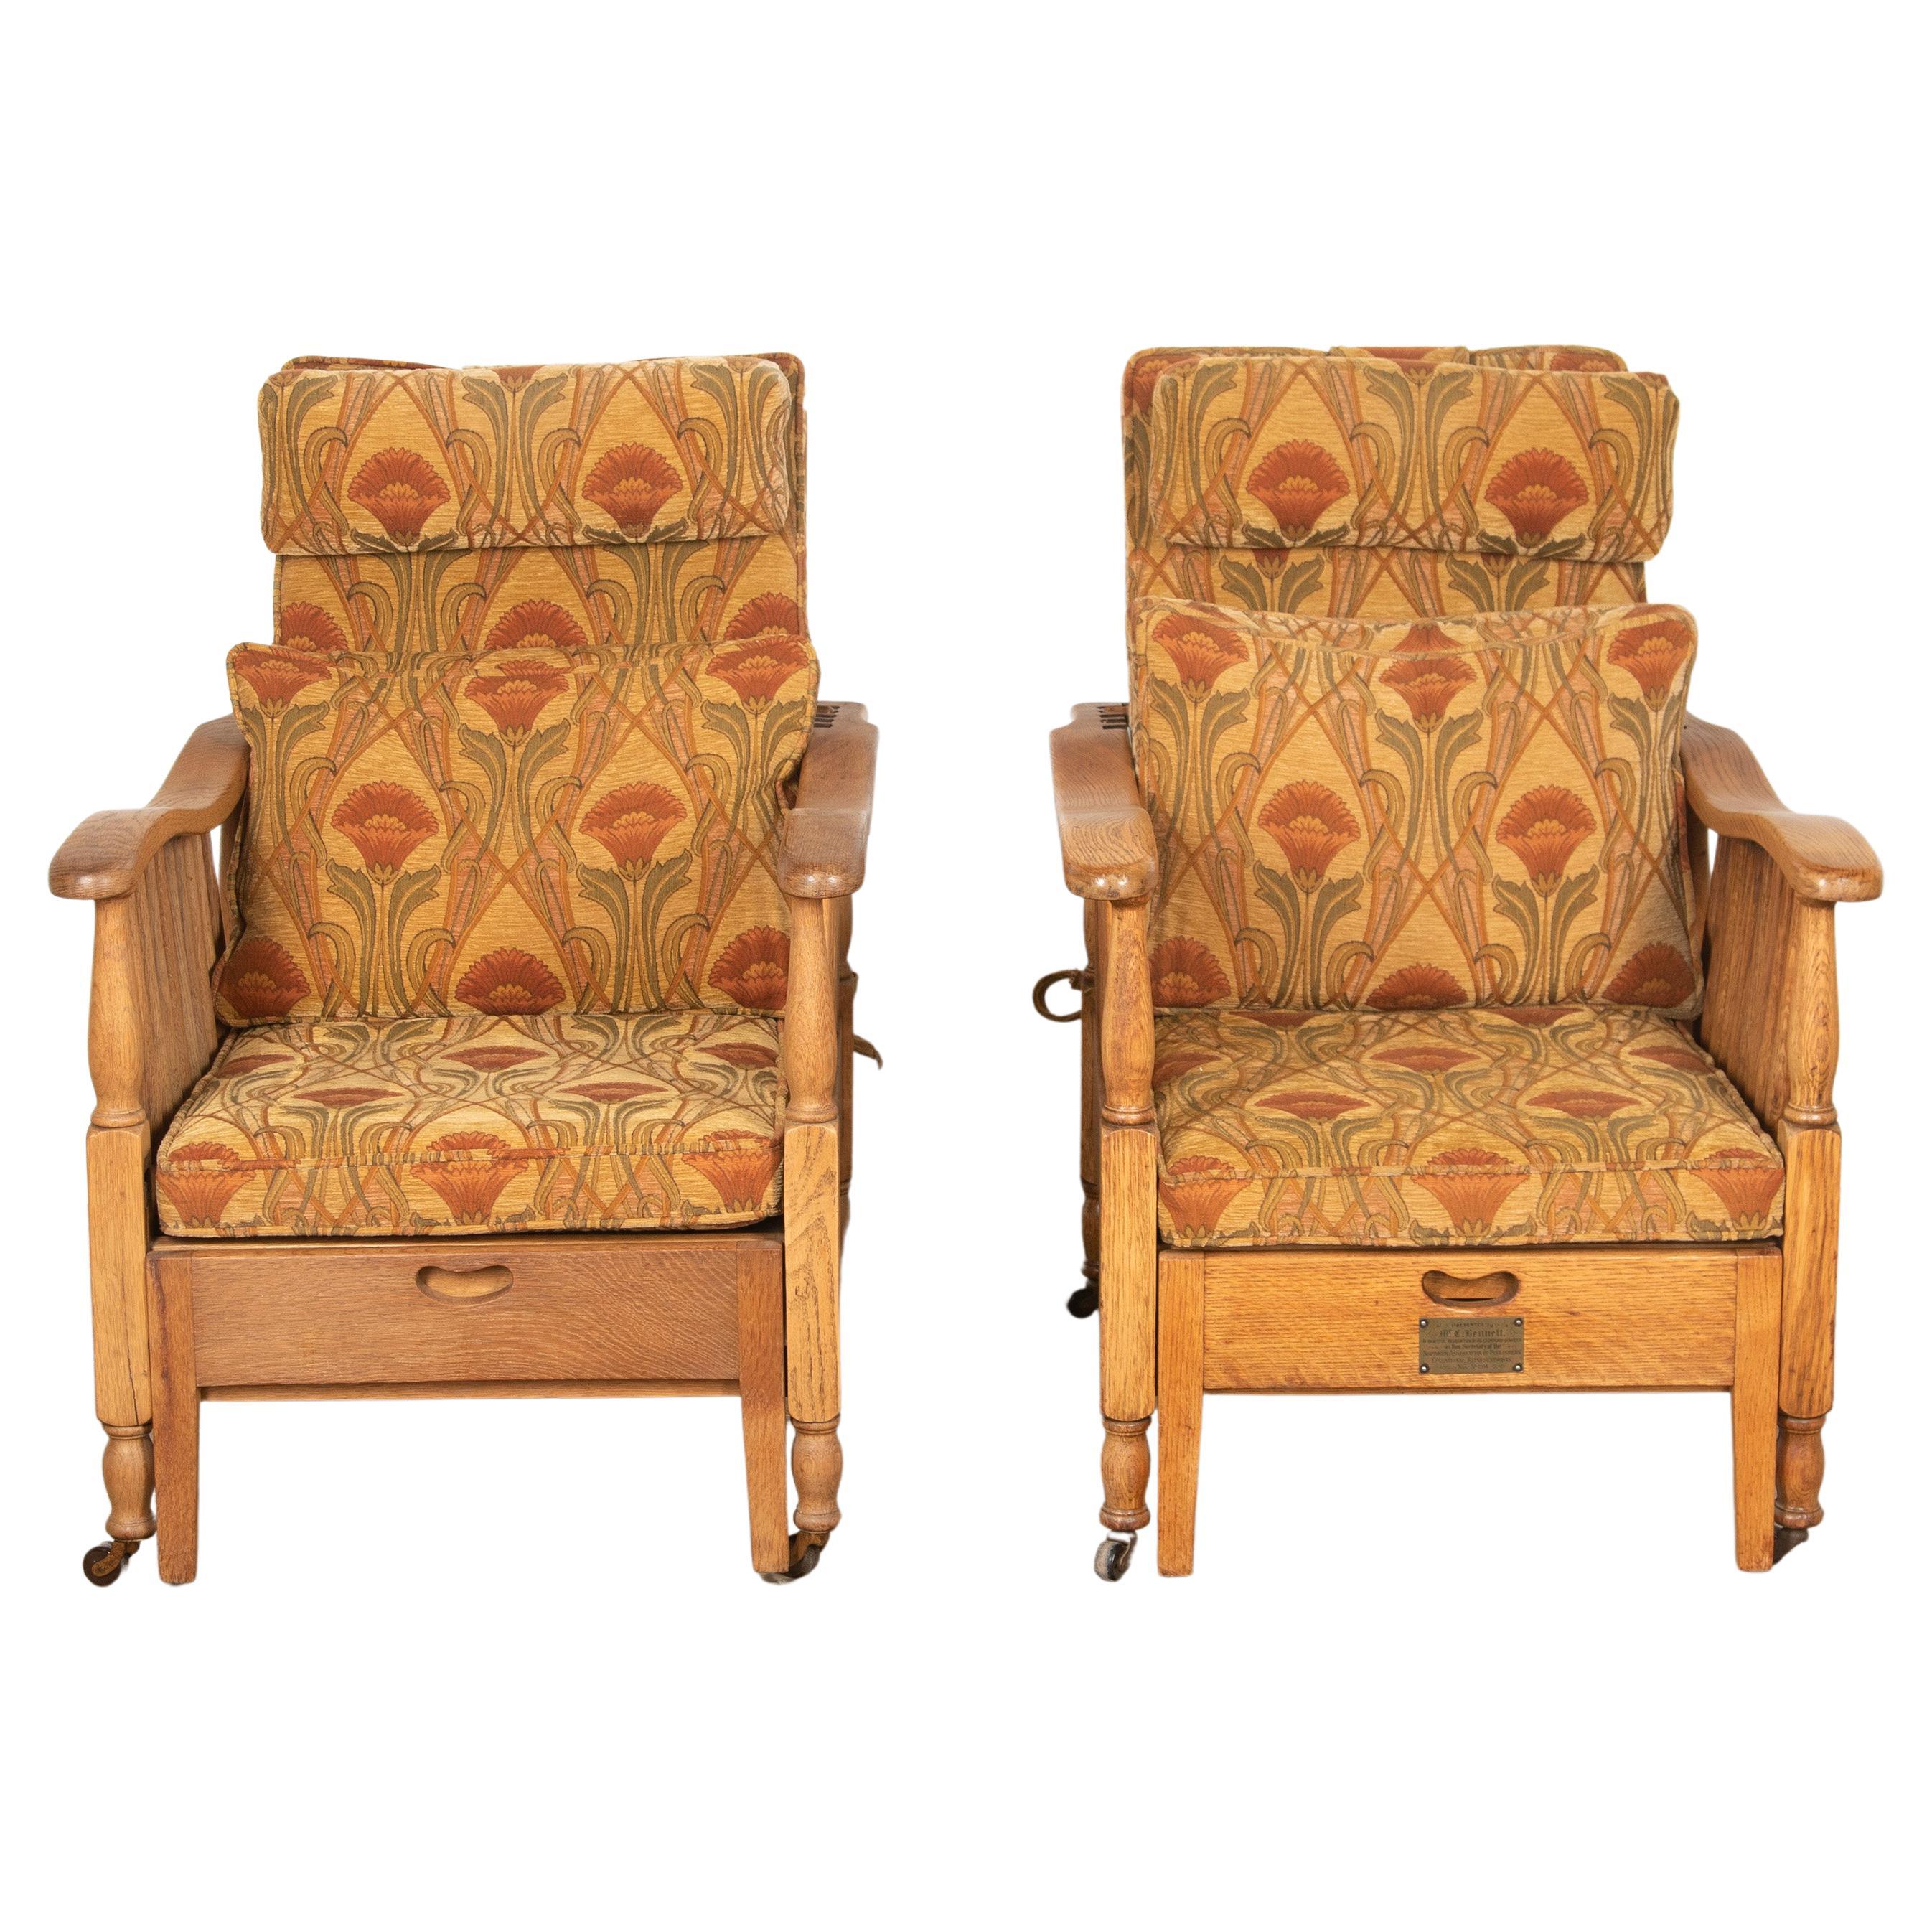 Pair of Arts & Crafts Recliners